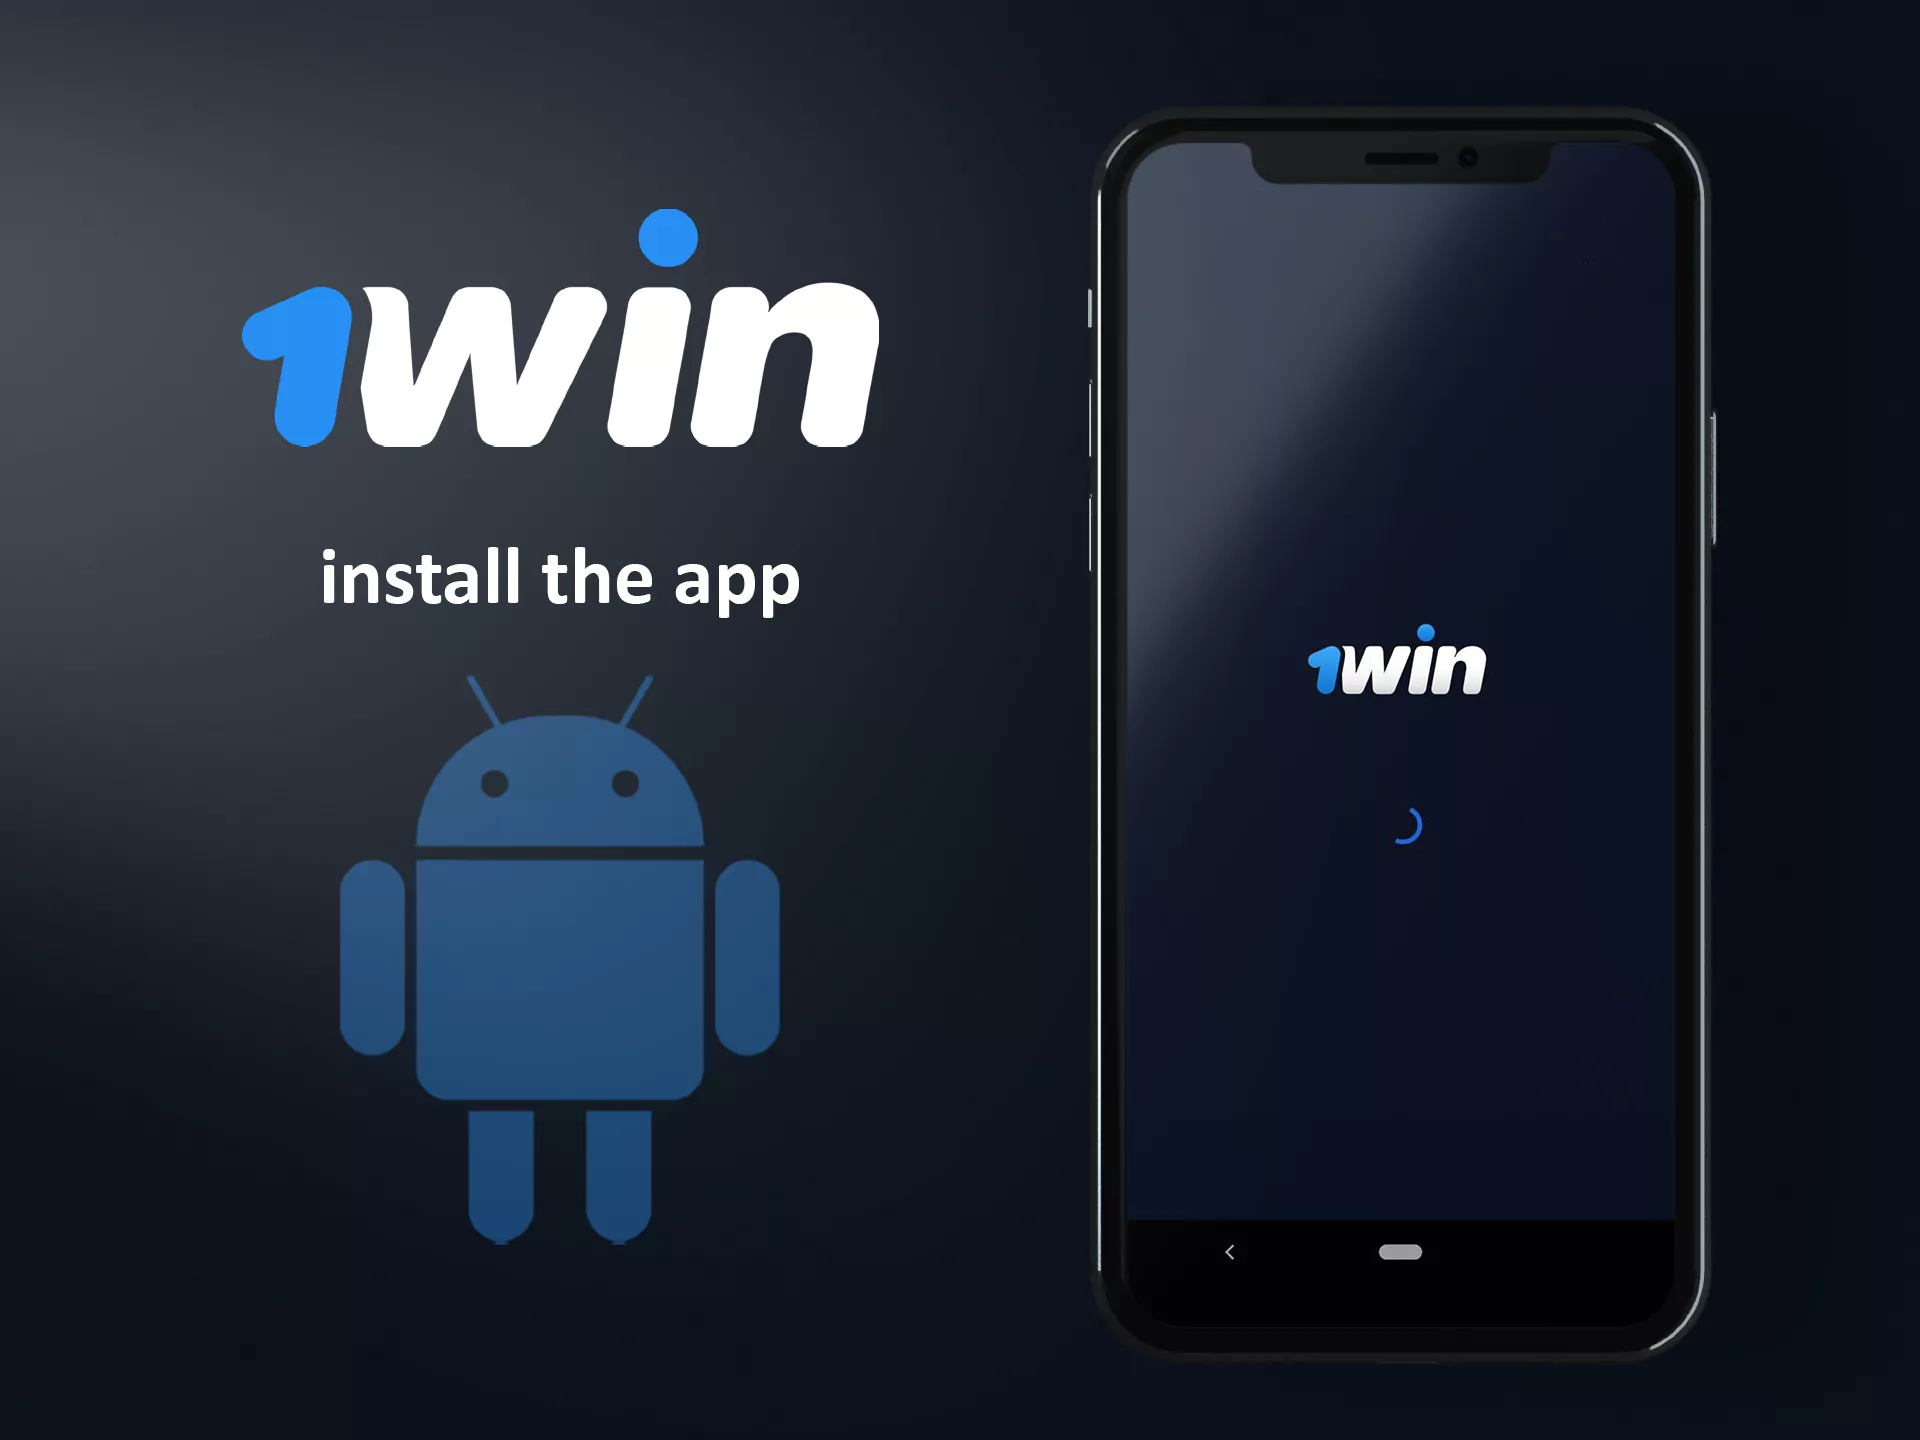 Run the 1win apk file and install the mobile app on your smartphone.